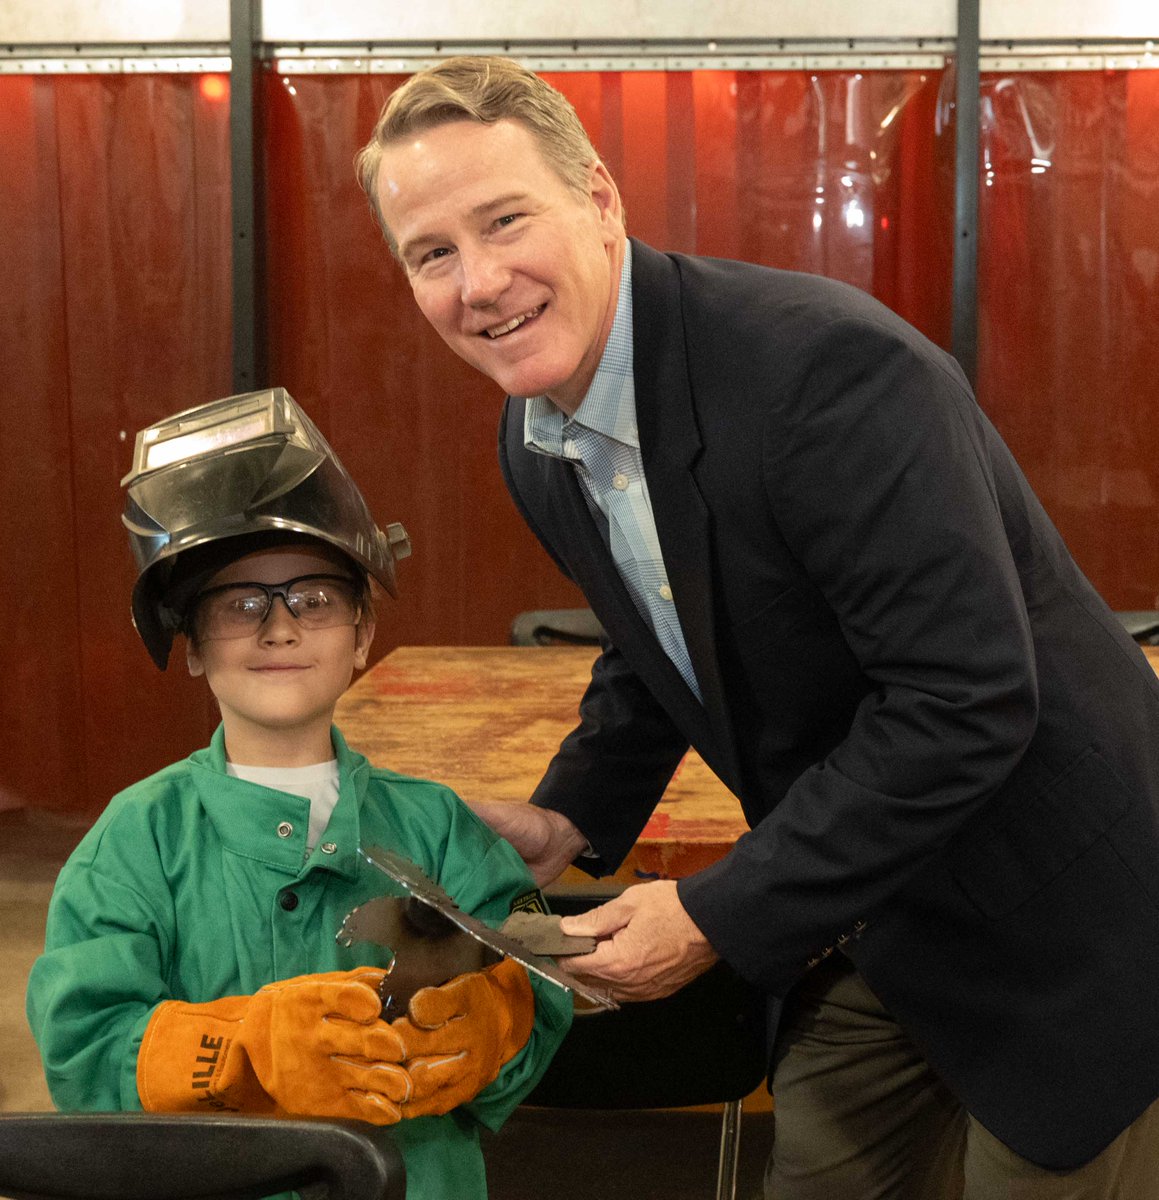 Today at @NewLexingtonHS, Lt. Governor @JonHusted met elementary students who are learning to weld in the school’s Emergent Welding Program. It’s never too early to try out your future career! Ohio has the opportunity for you. #InDemandOhio